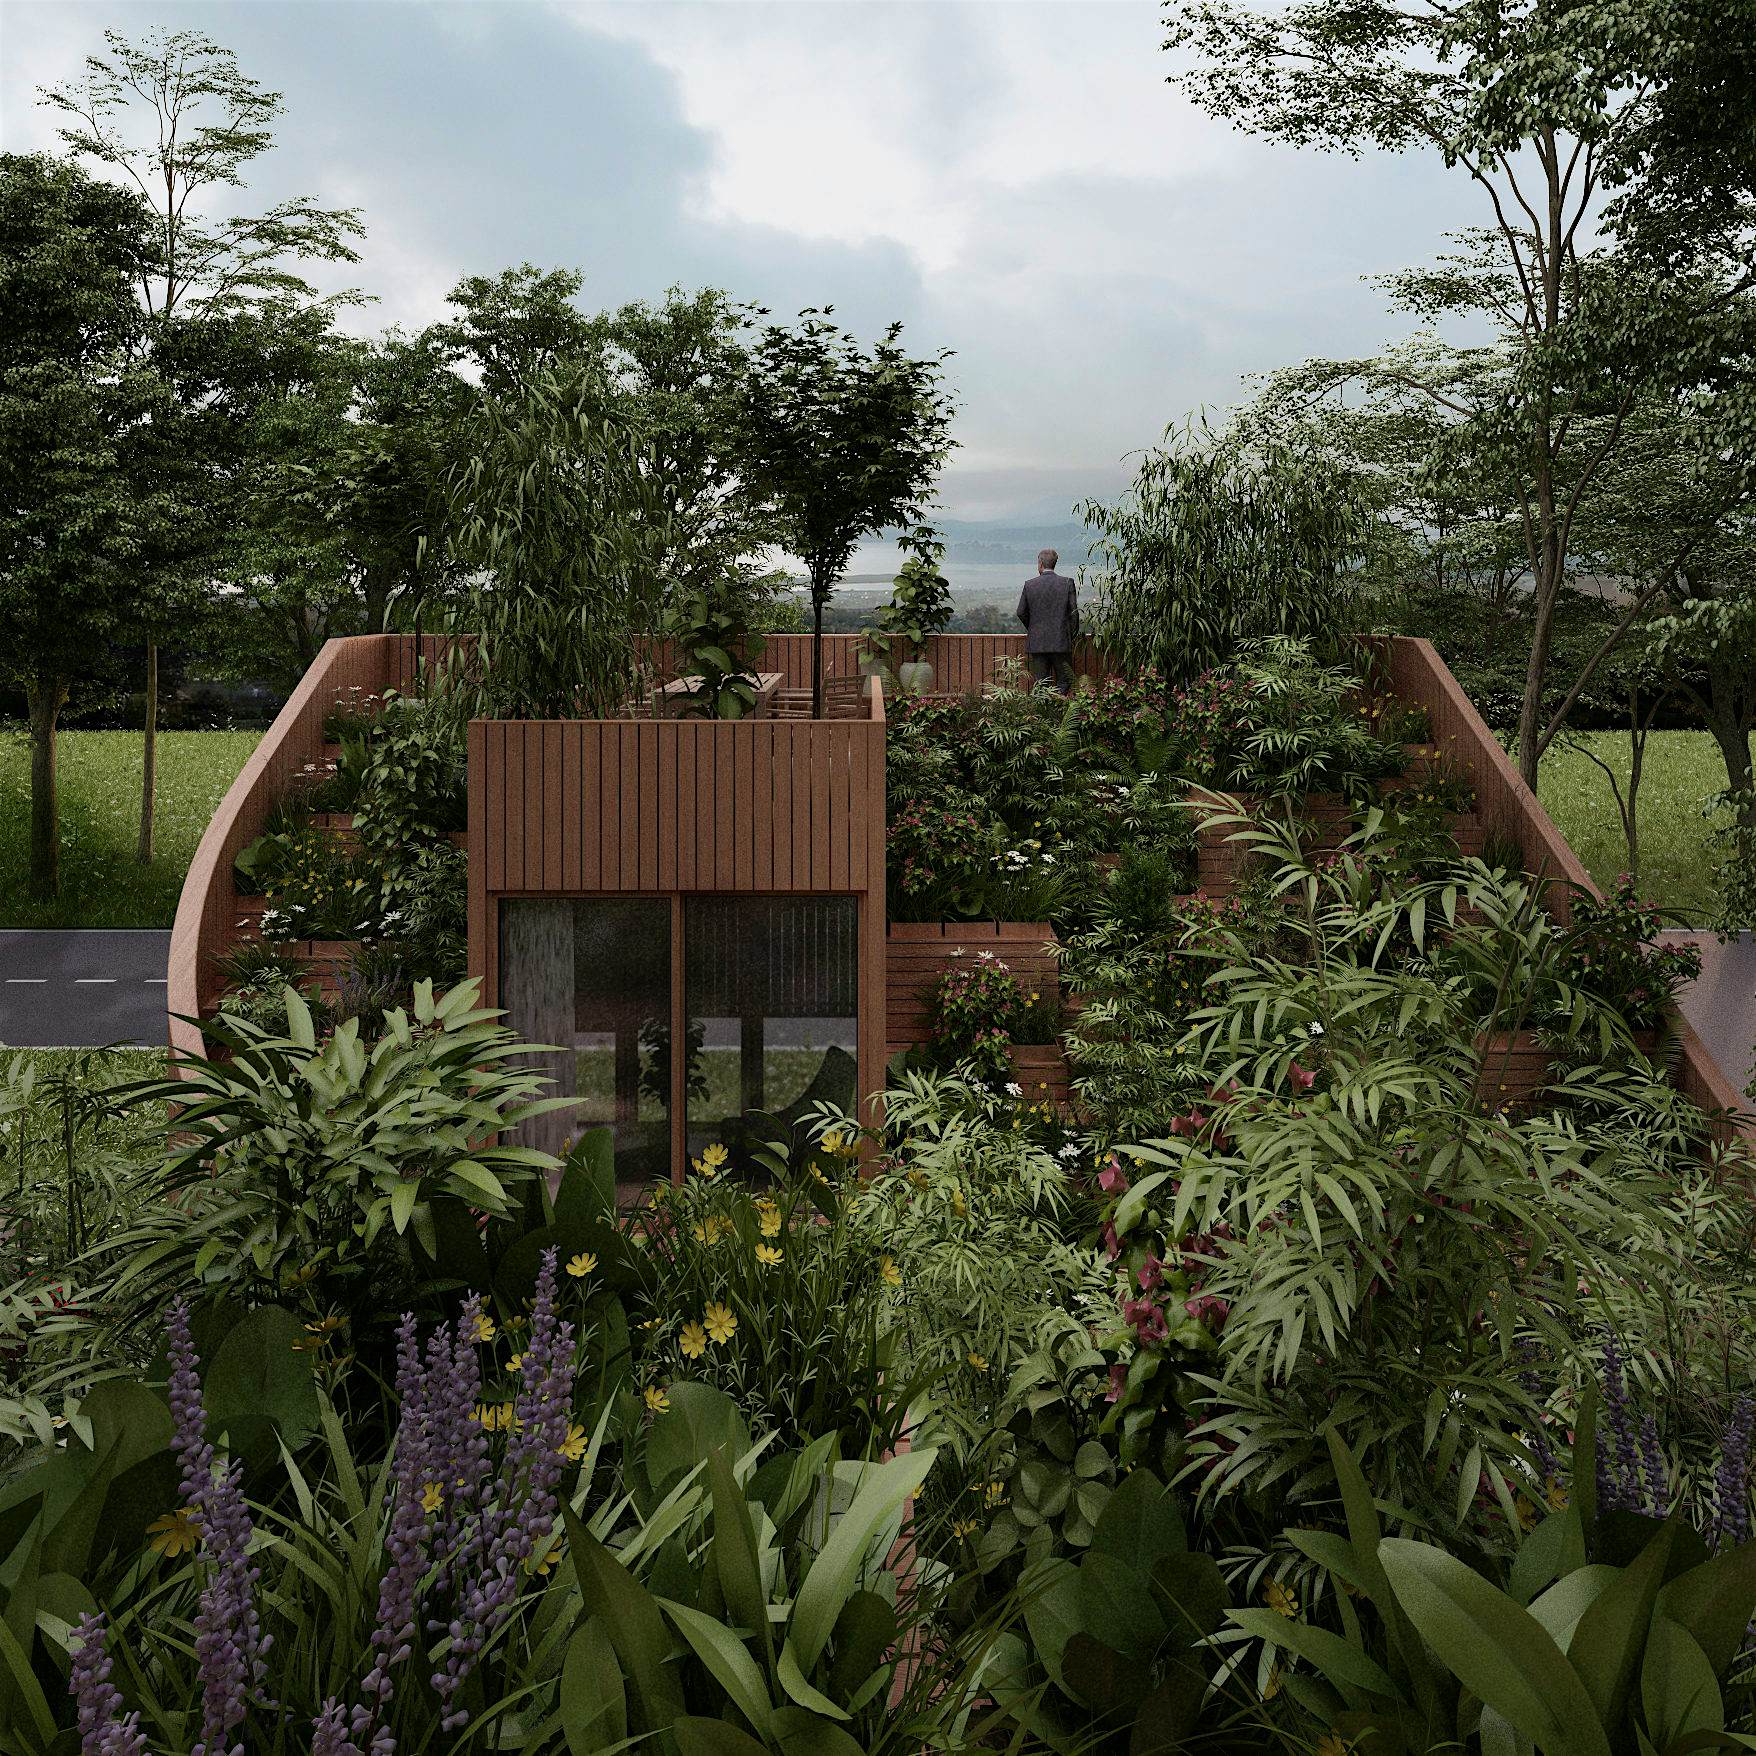 This Self Sufficient Home Concept Features A Full Garden On The